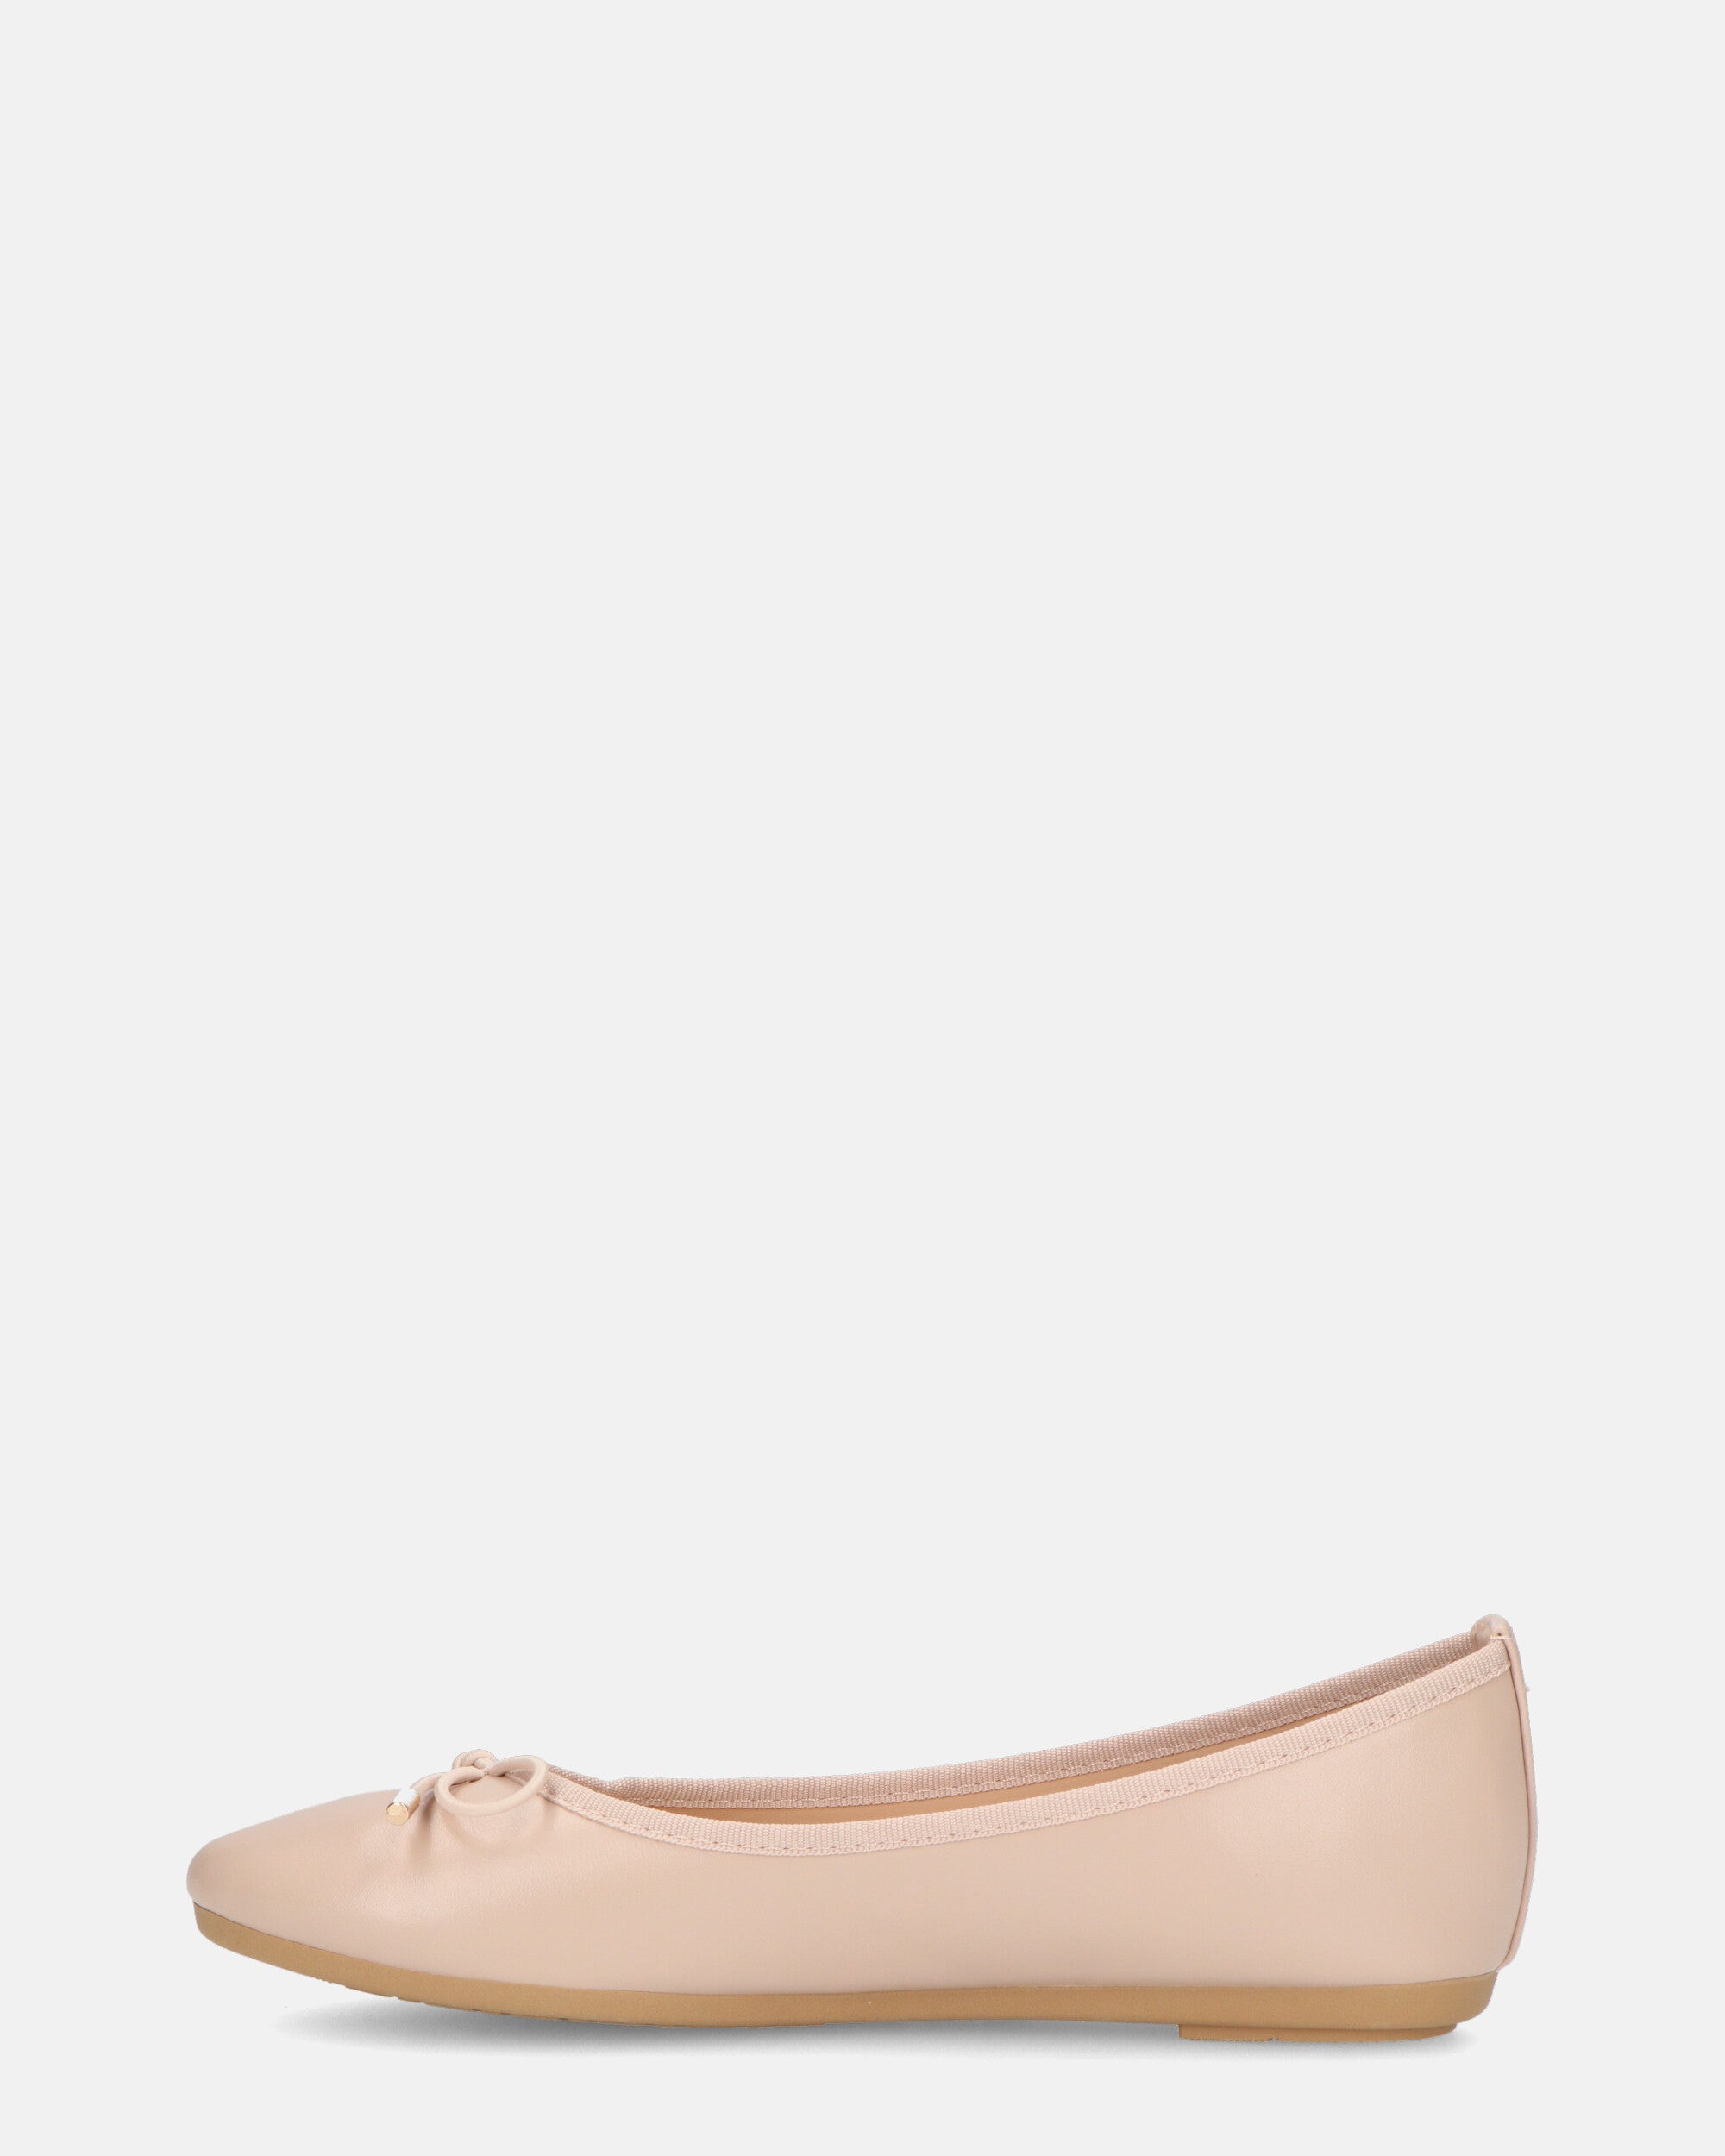 GWEN - beige ballet flats with bow on toe